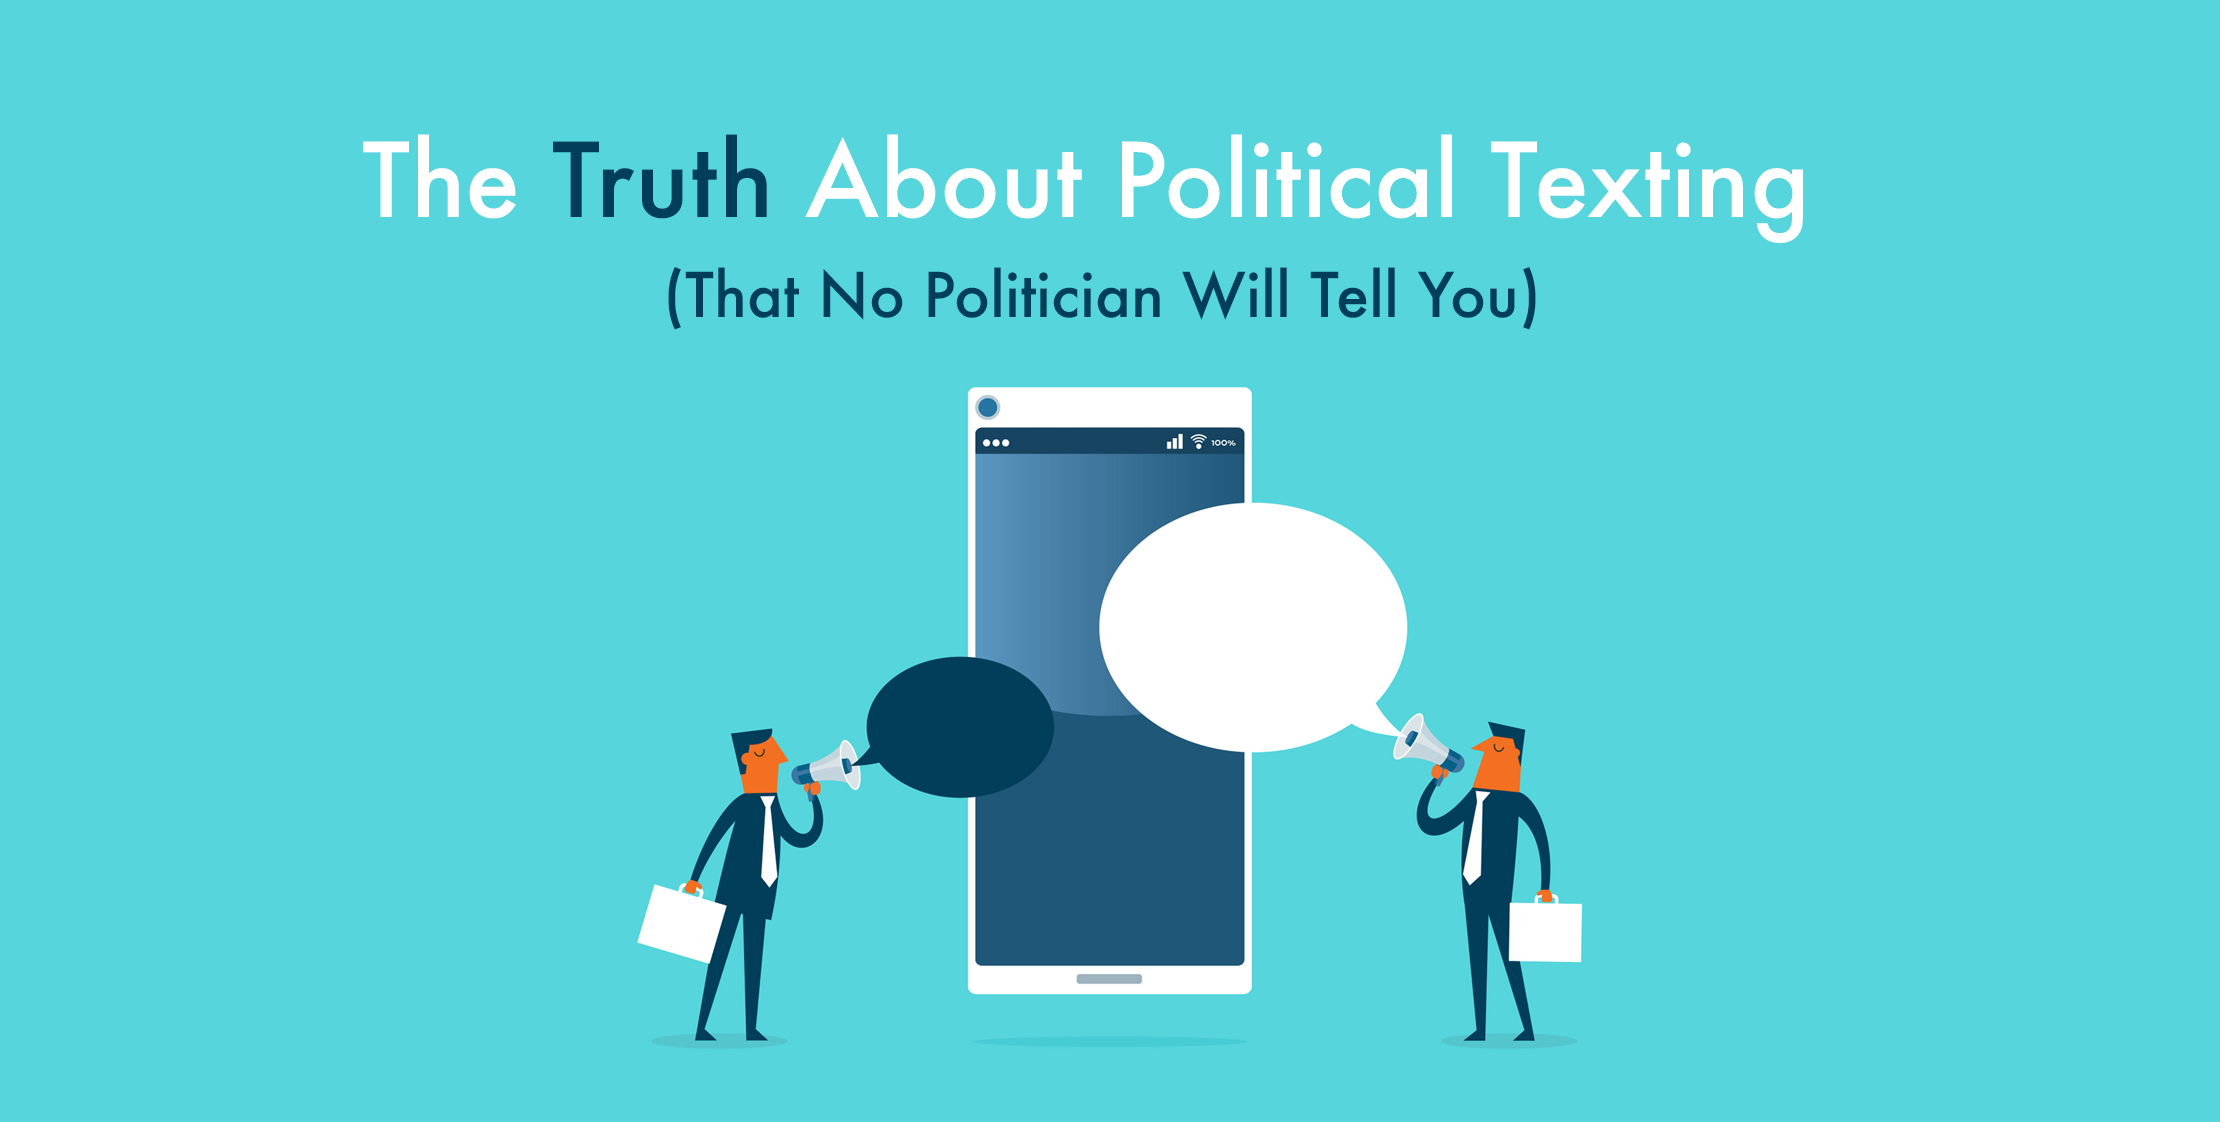 The-Truth-About-Political-Texting-That-No-Politician-Will-Tell-You-7